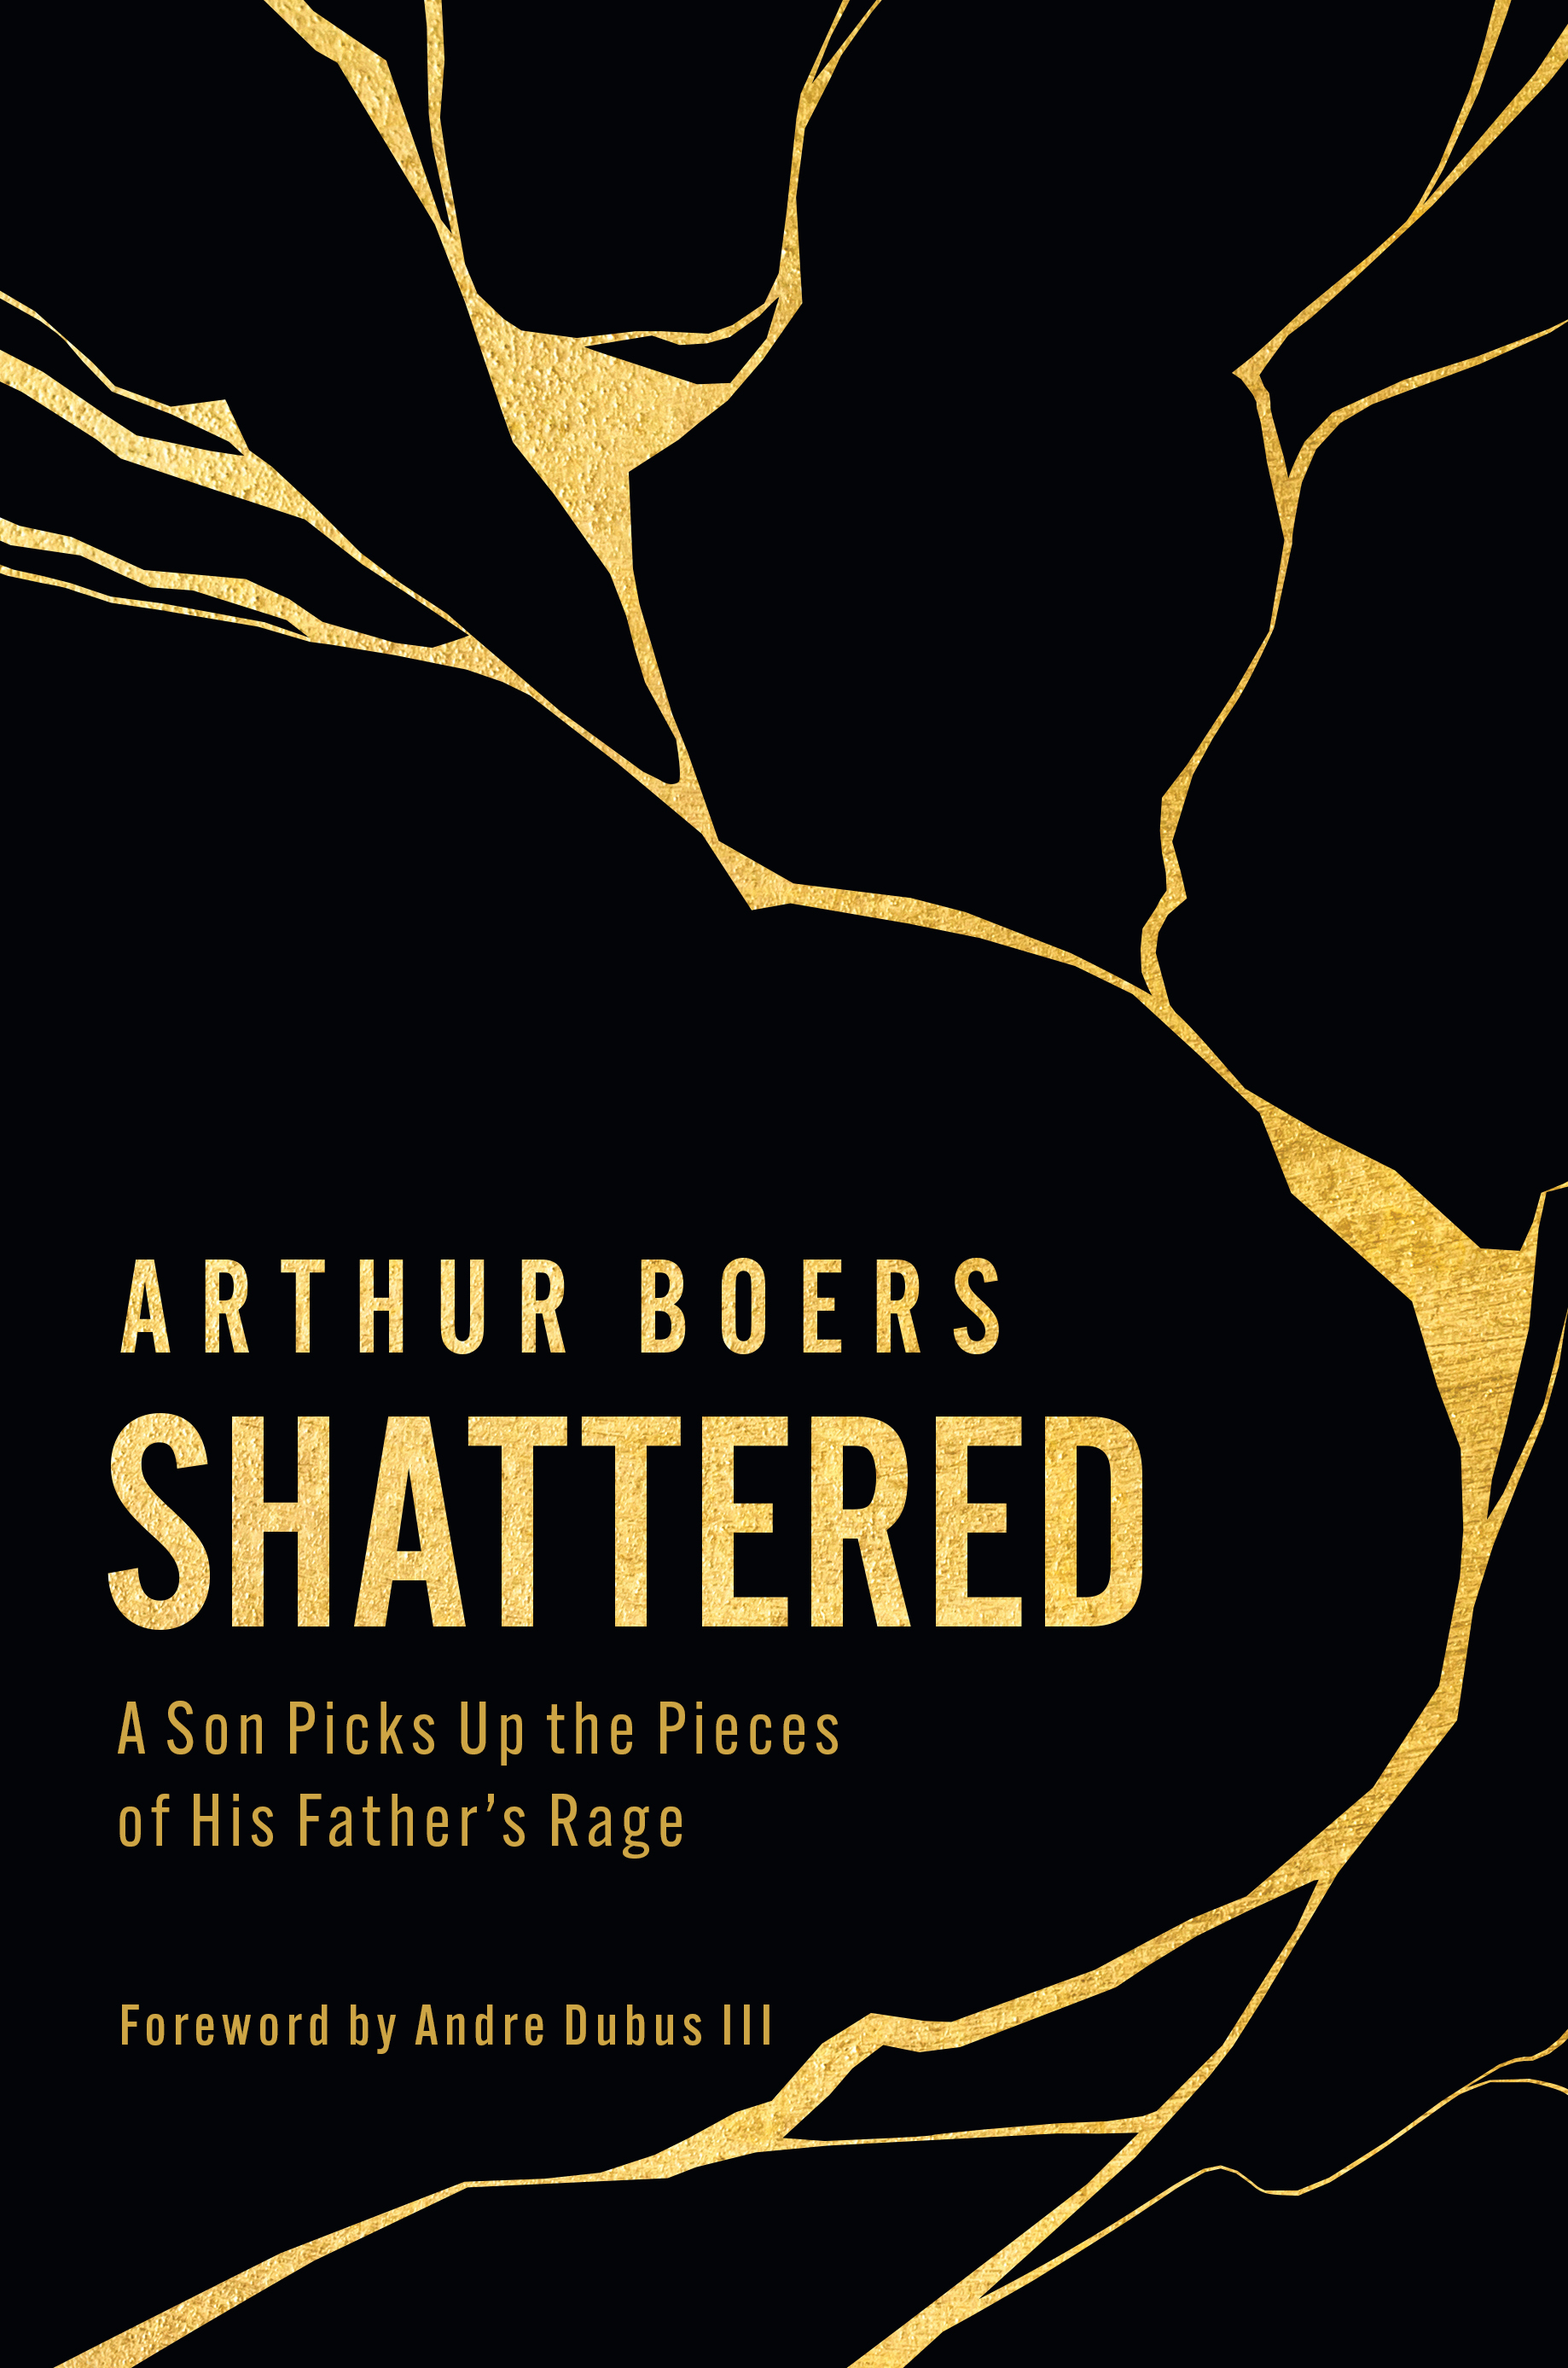 Shattered: A Son Picks Up the Pieces of His Father’s Rage